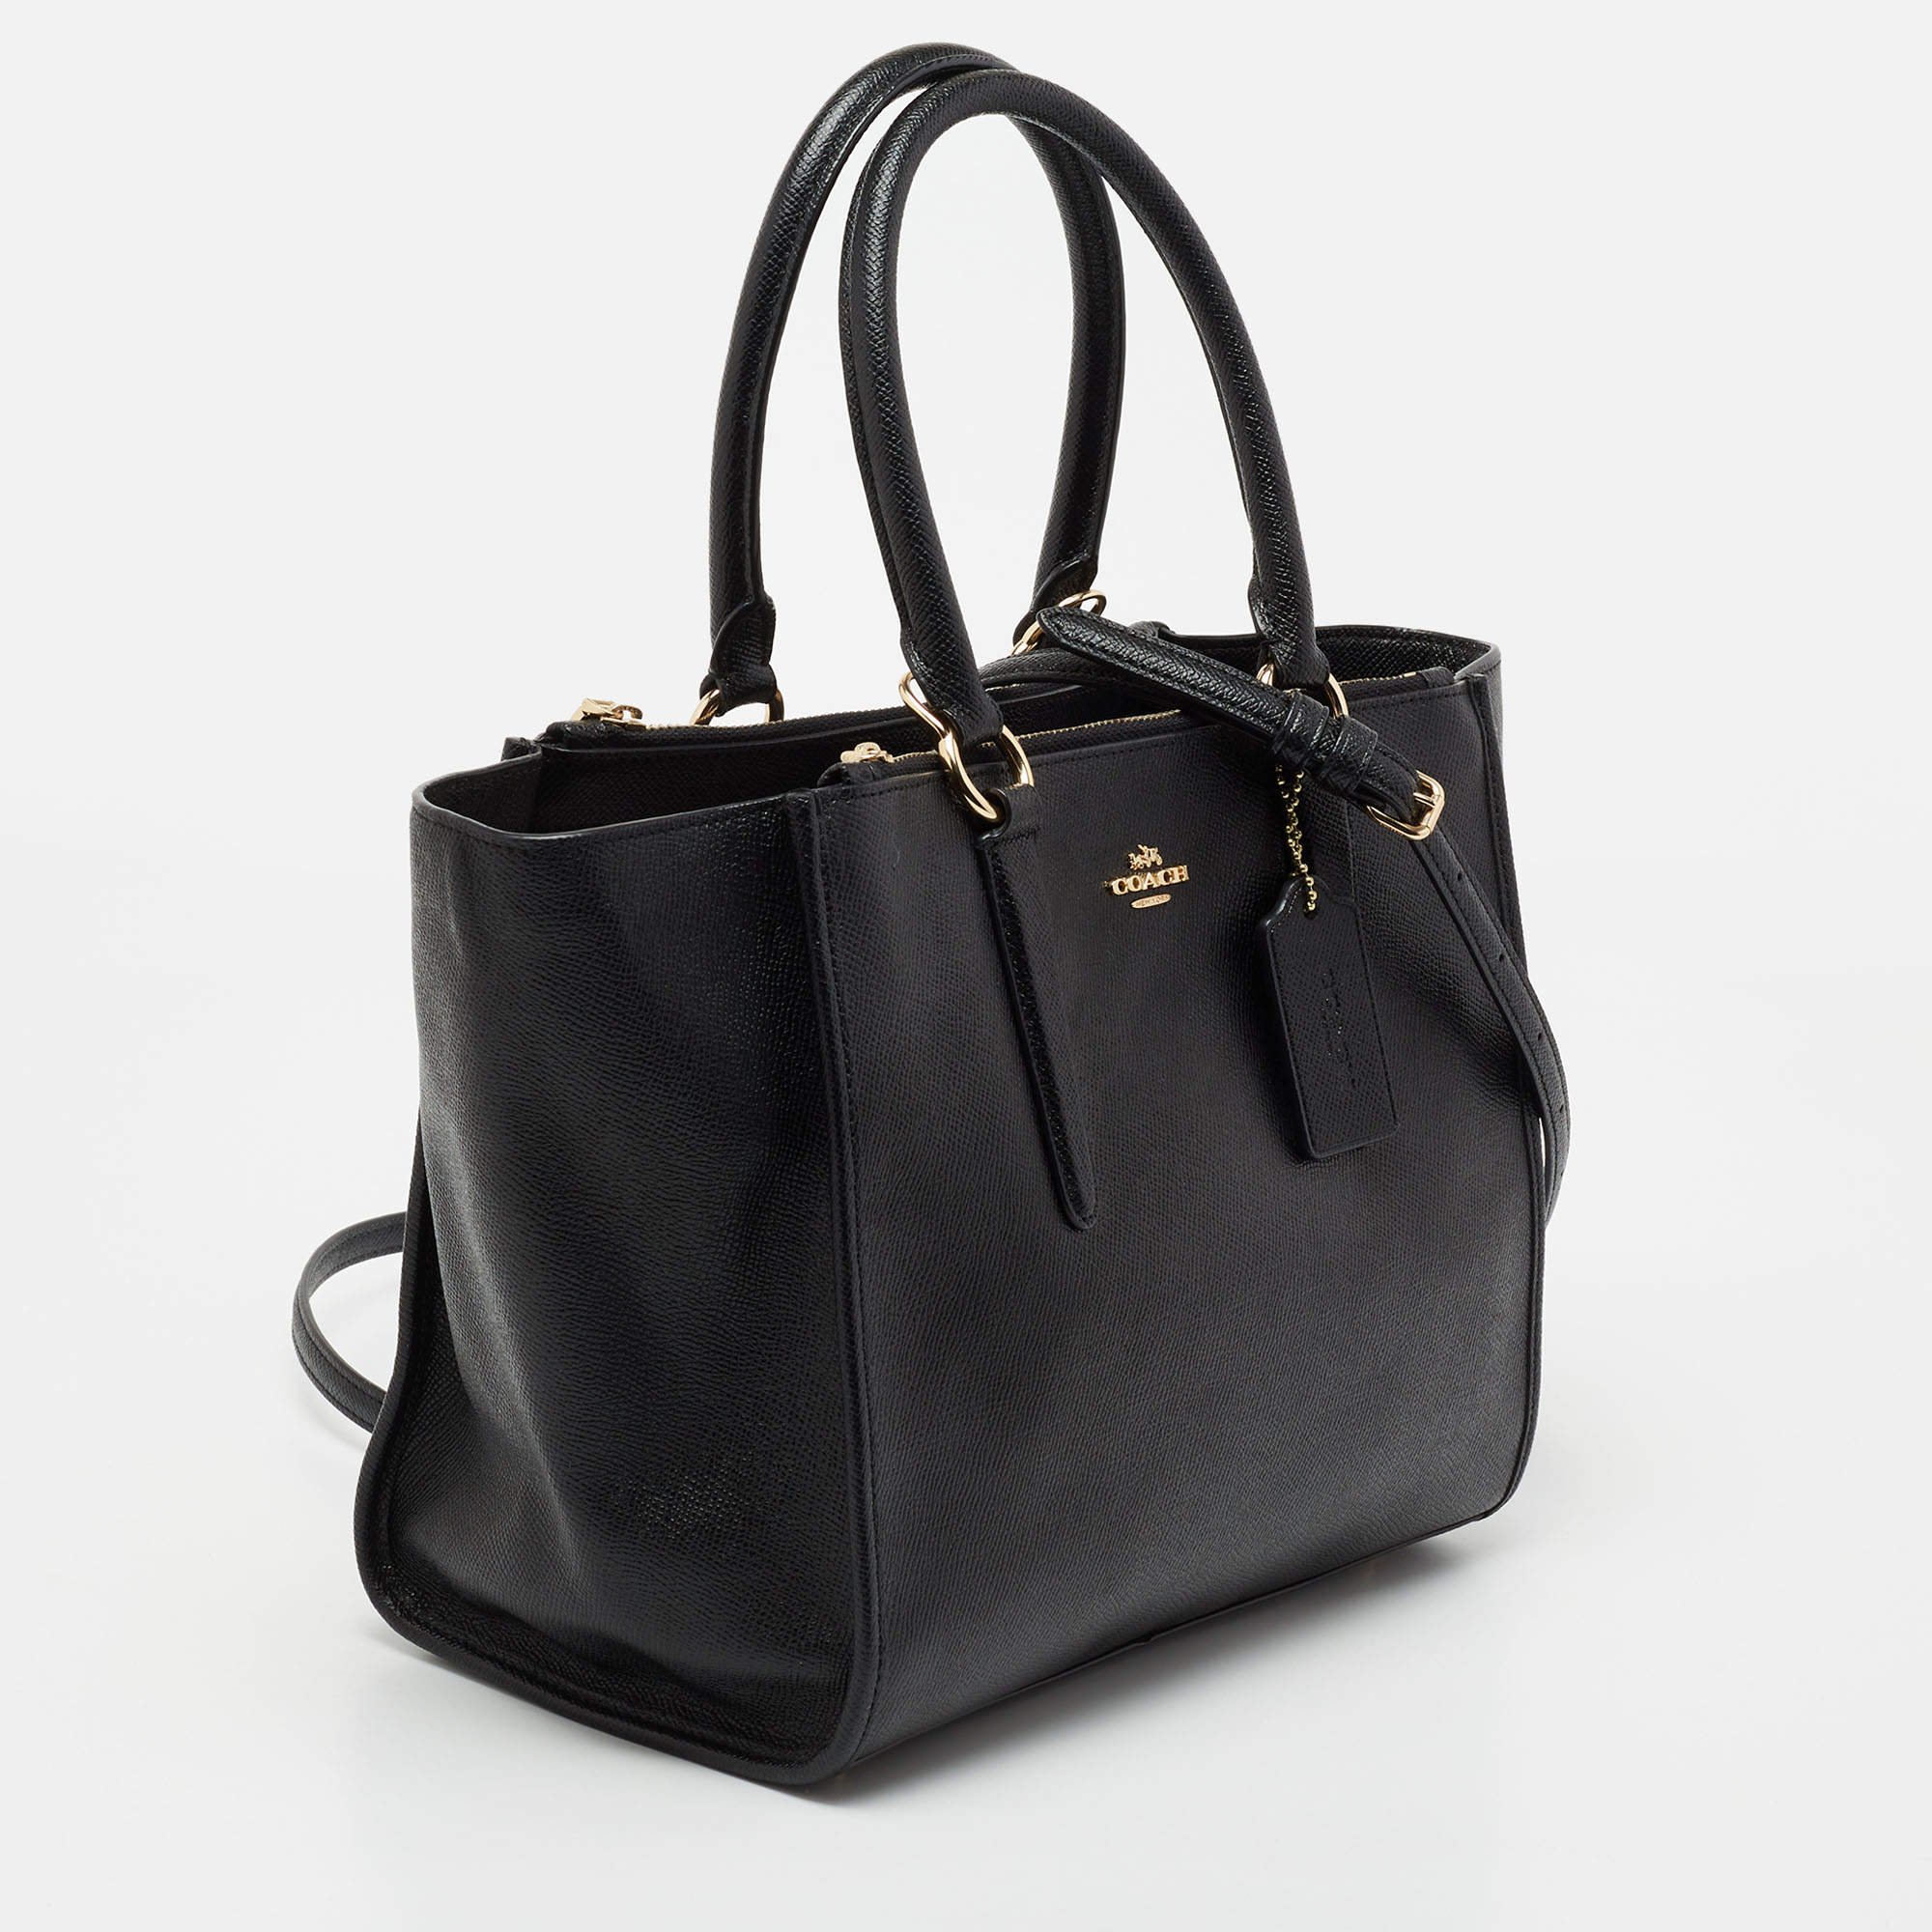 Coach Crosby Carryall Double Zip Tote Bag Review 